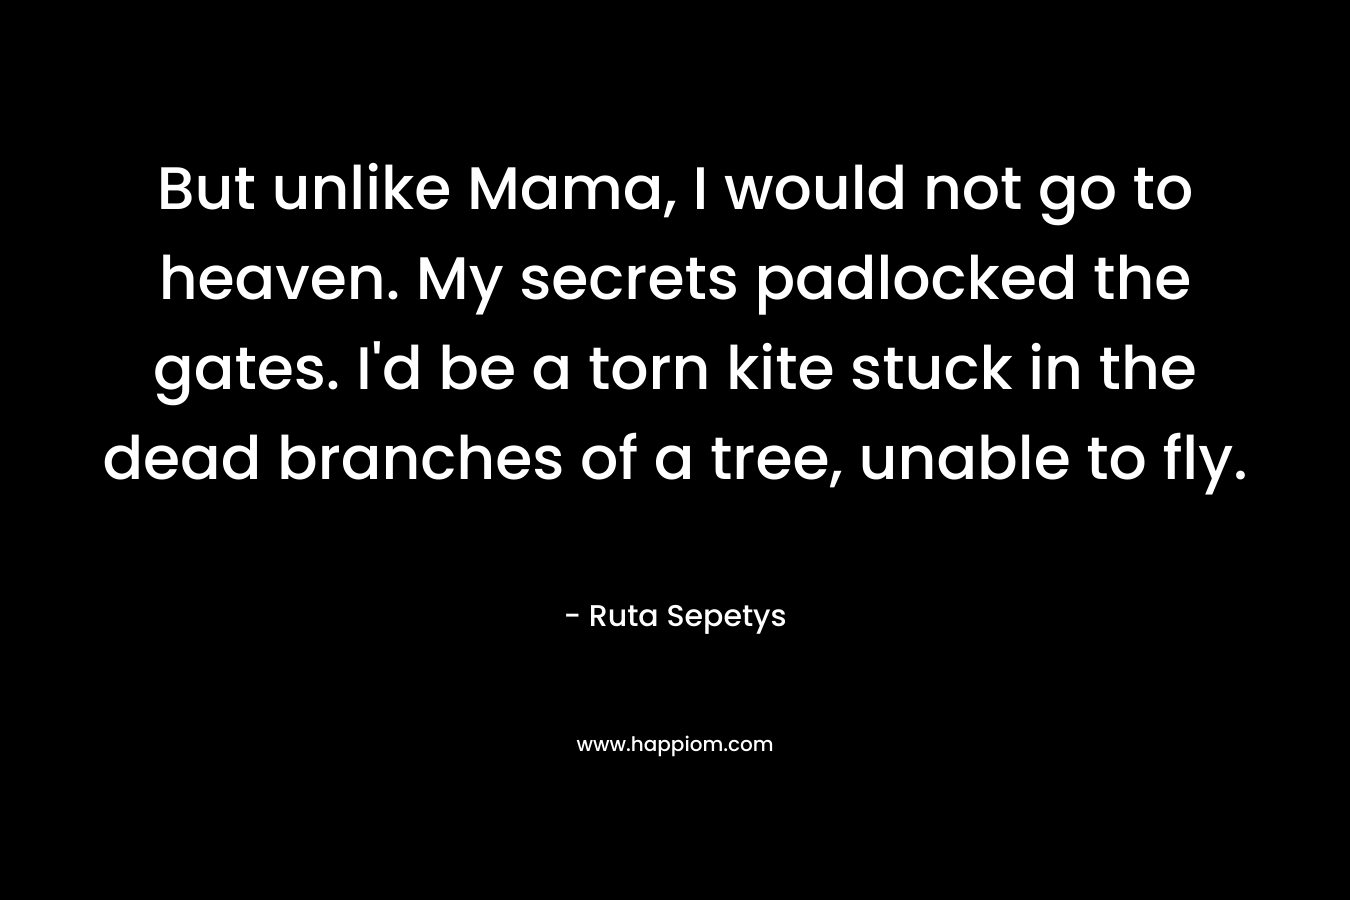 But unlike Mama, I would not go to heaven. My secrets padlocked the gates. I’d be a torn kite stuck in the dead branches of a tree, unable to fly. – Ruta Sepetys